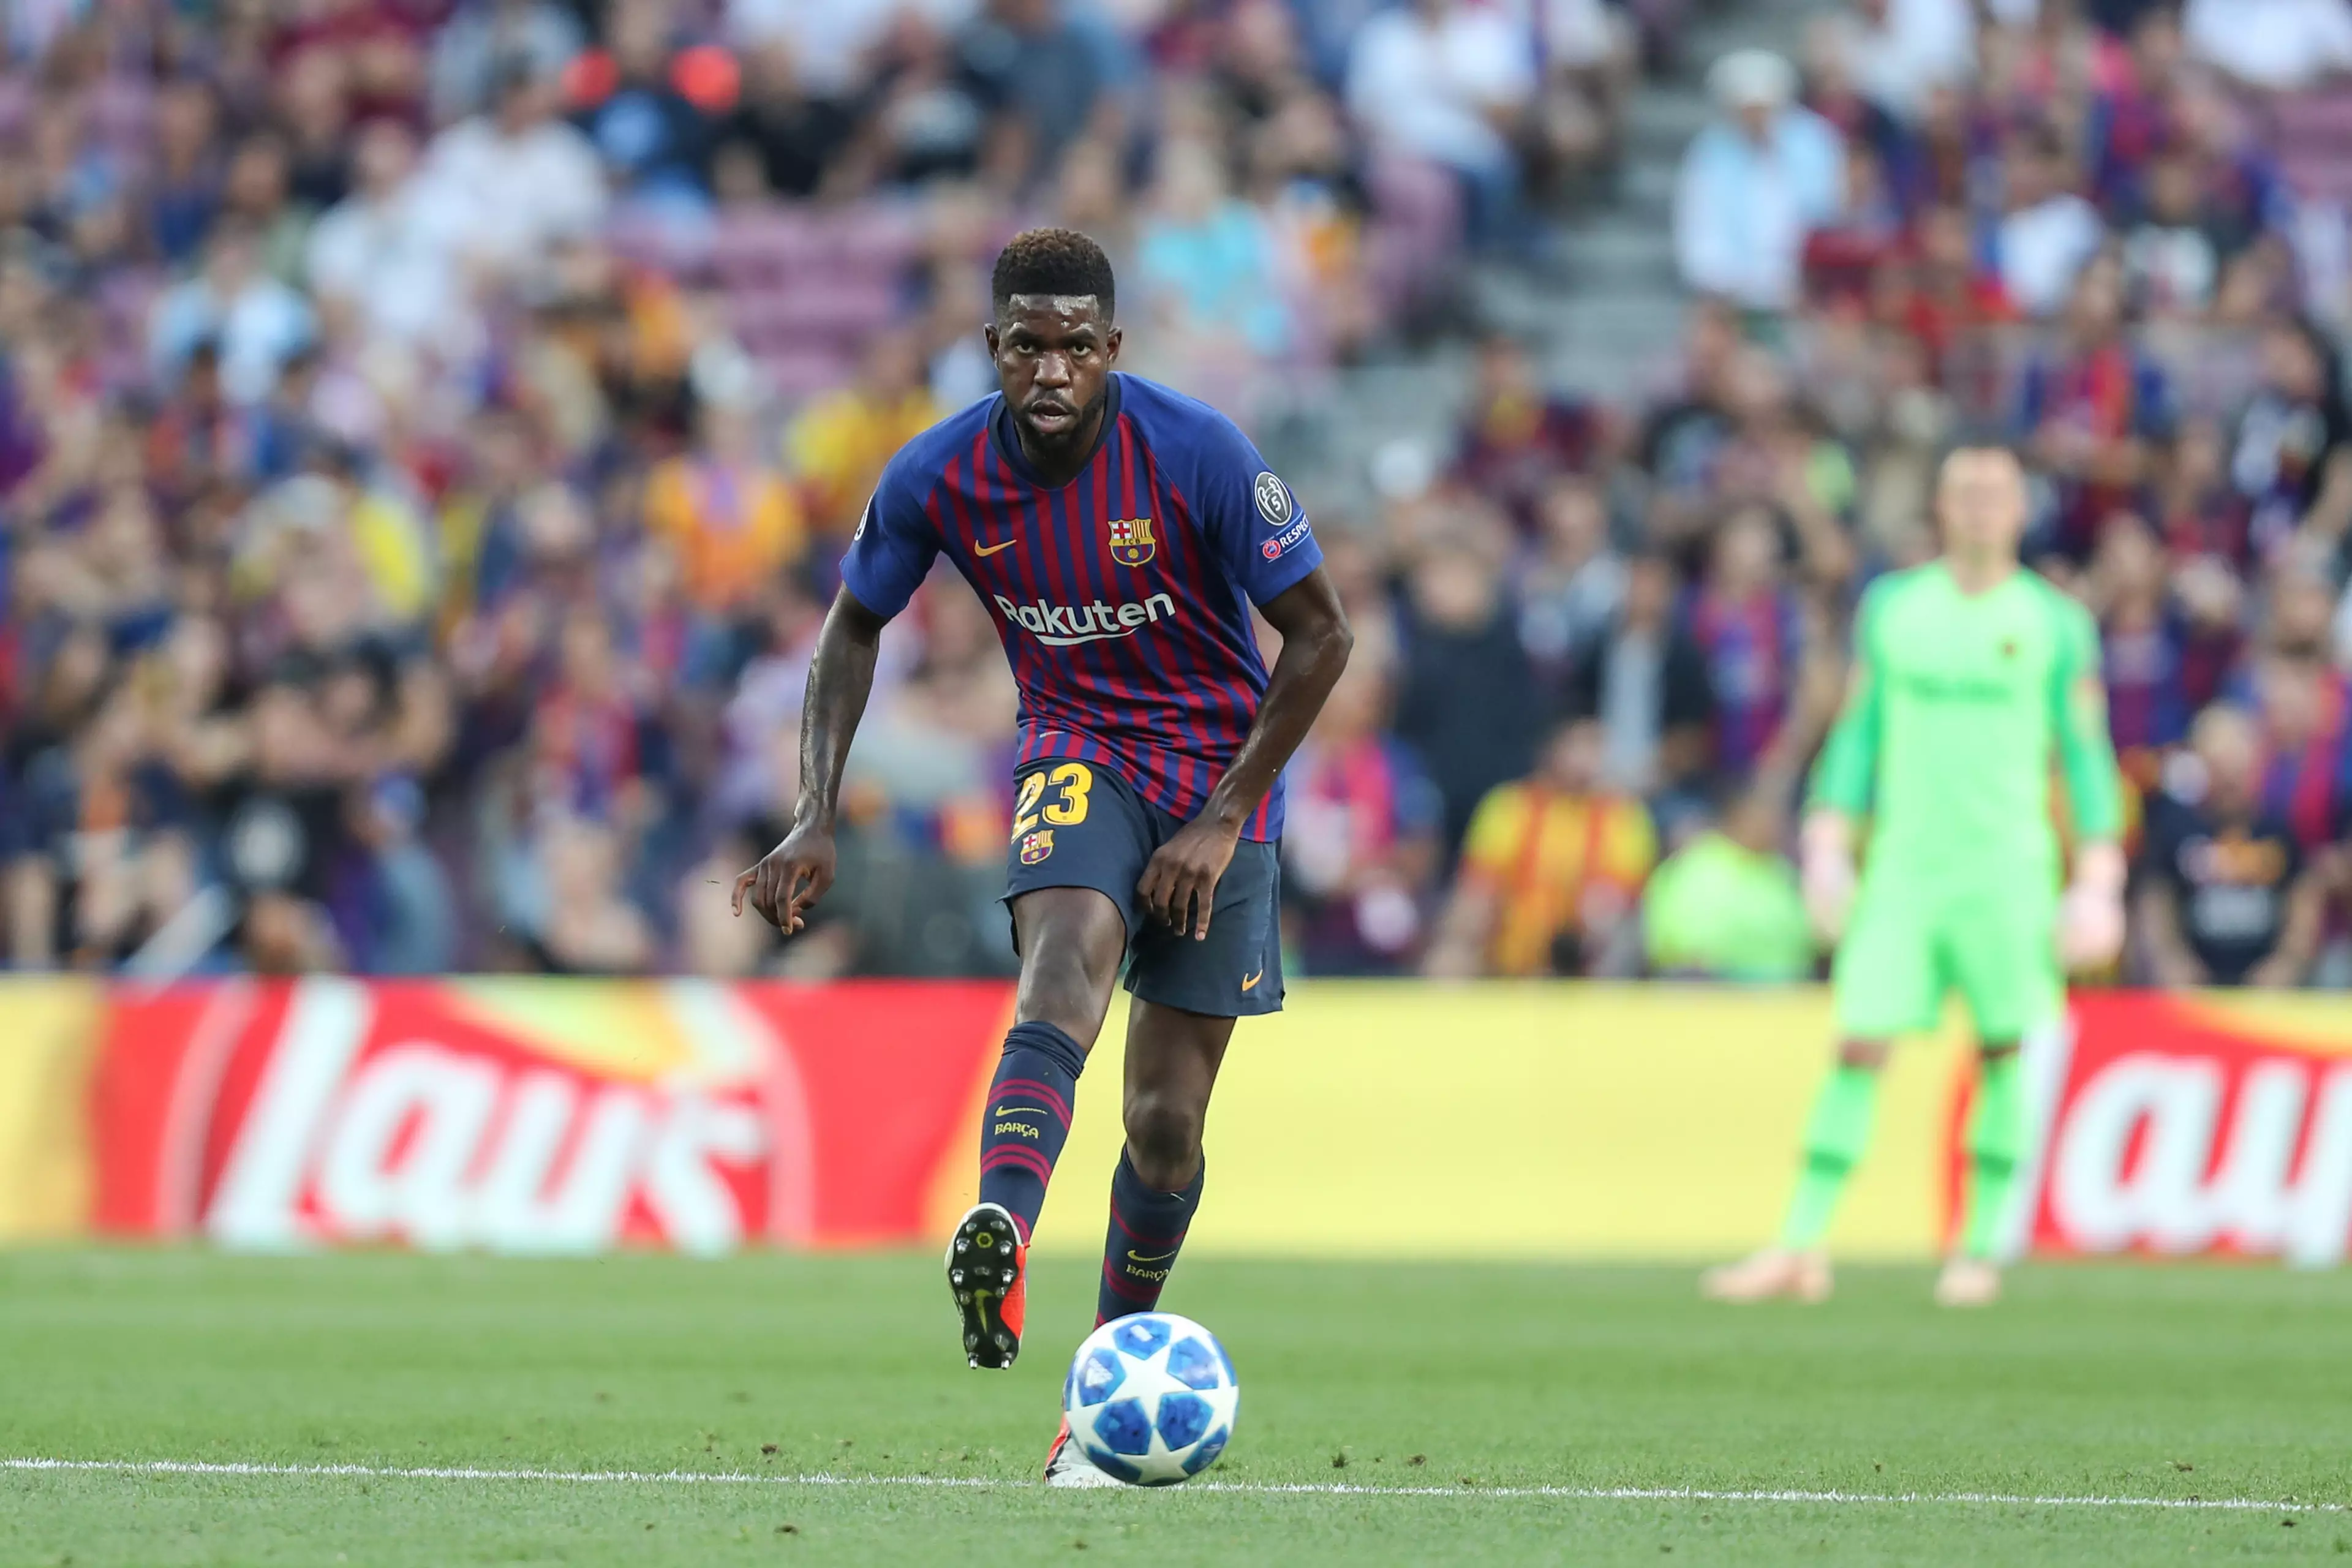 Umtiti has been overtaken by Lenglet in the pecking order this season. Image: PA Images